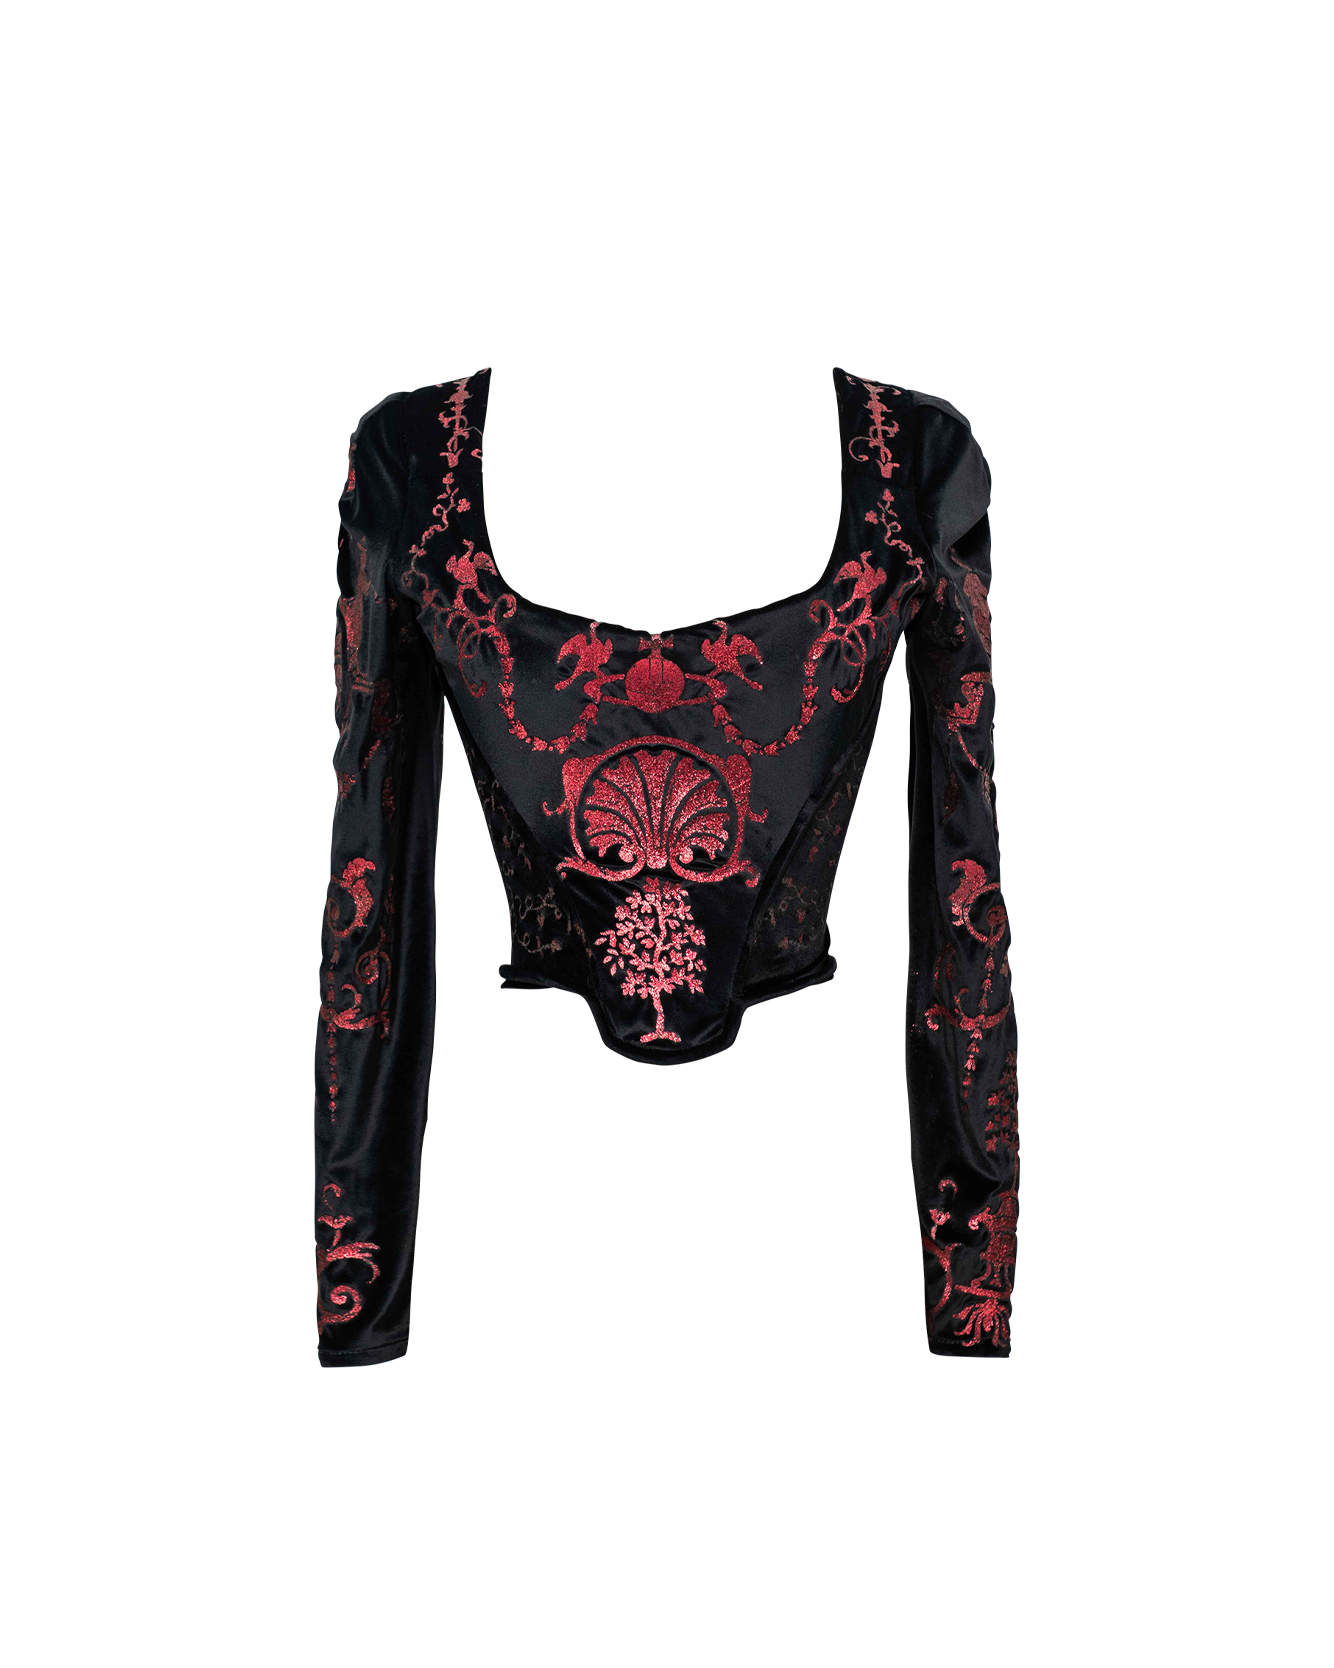 S/S 1992 ‘Salon’ Collection Black and Pink Boulle Print Velvet Corset